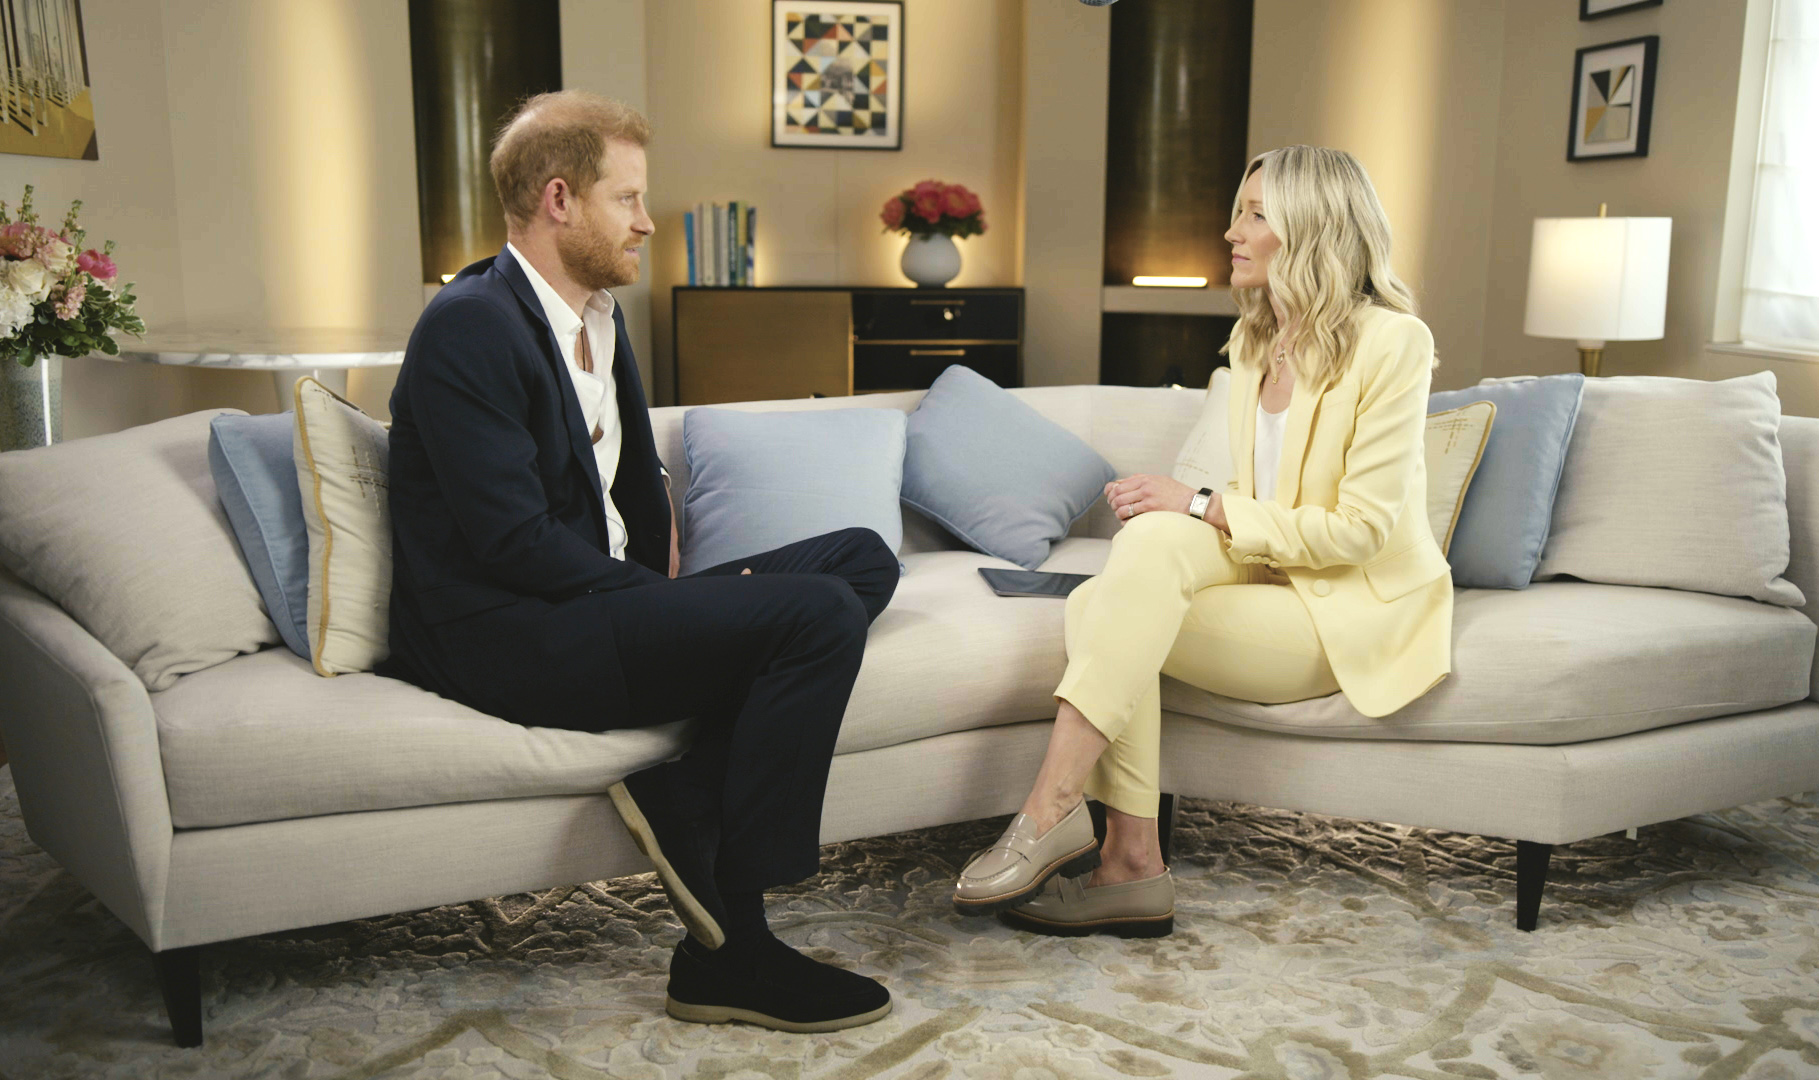 Harry sat on a sofa facing ITV News' Rebecca Barry during the interview